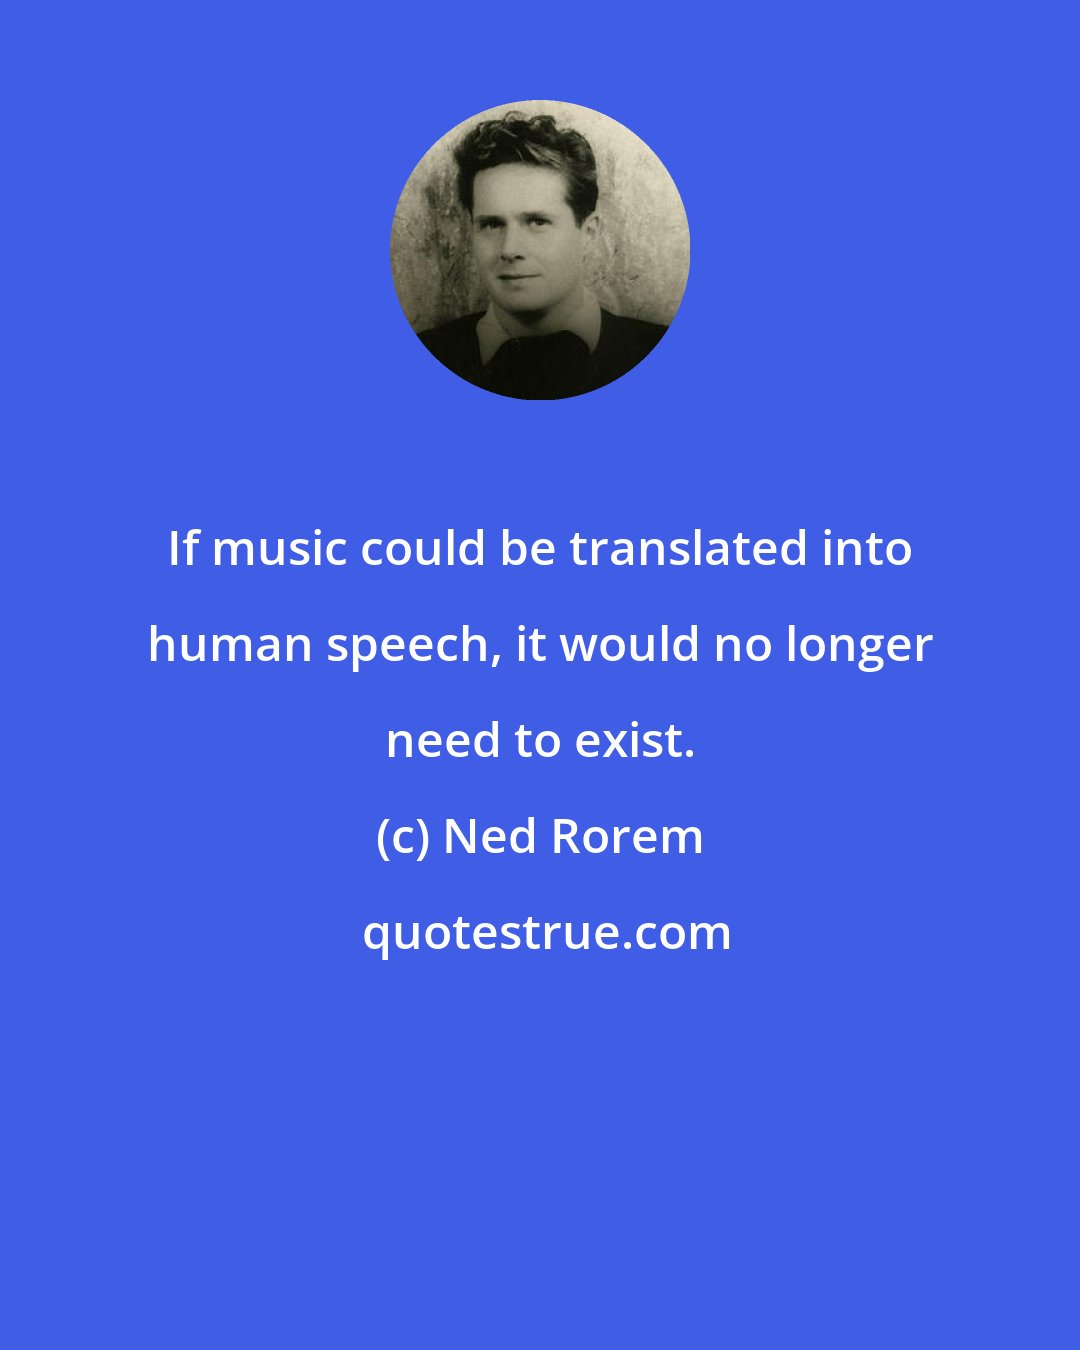 Ned Rorem: If music could be translated into human speech, it would no longer need to exist.